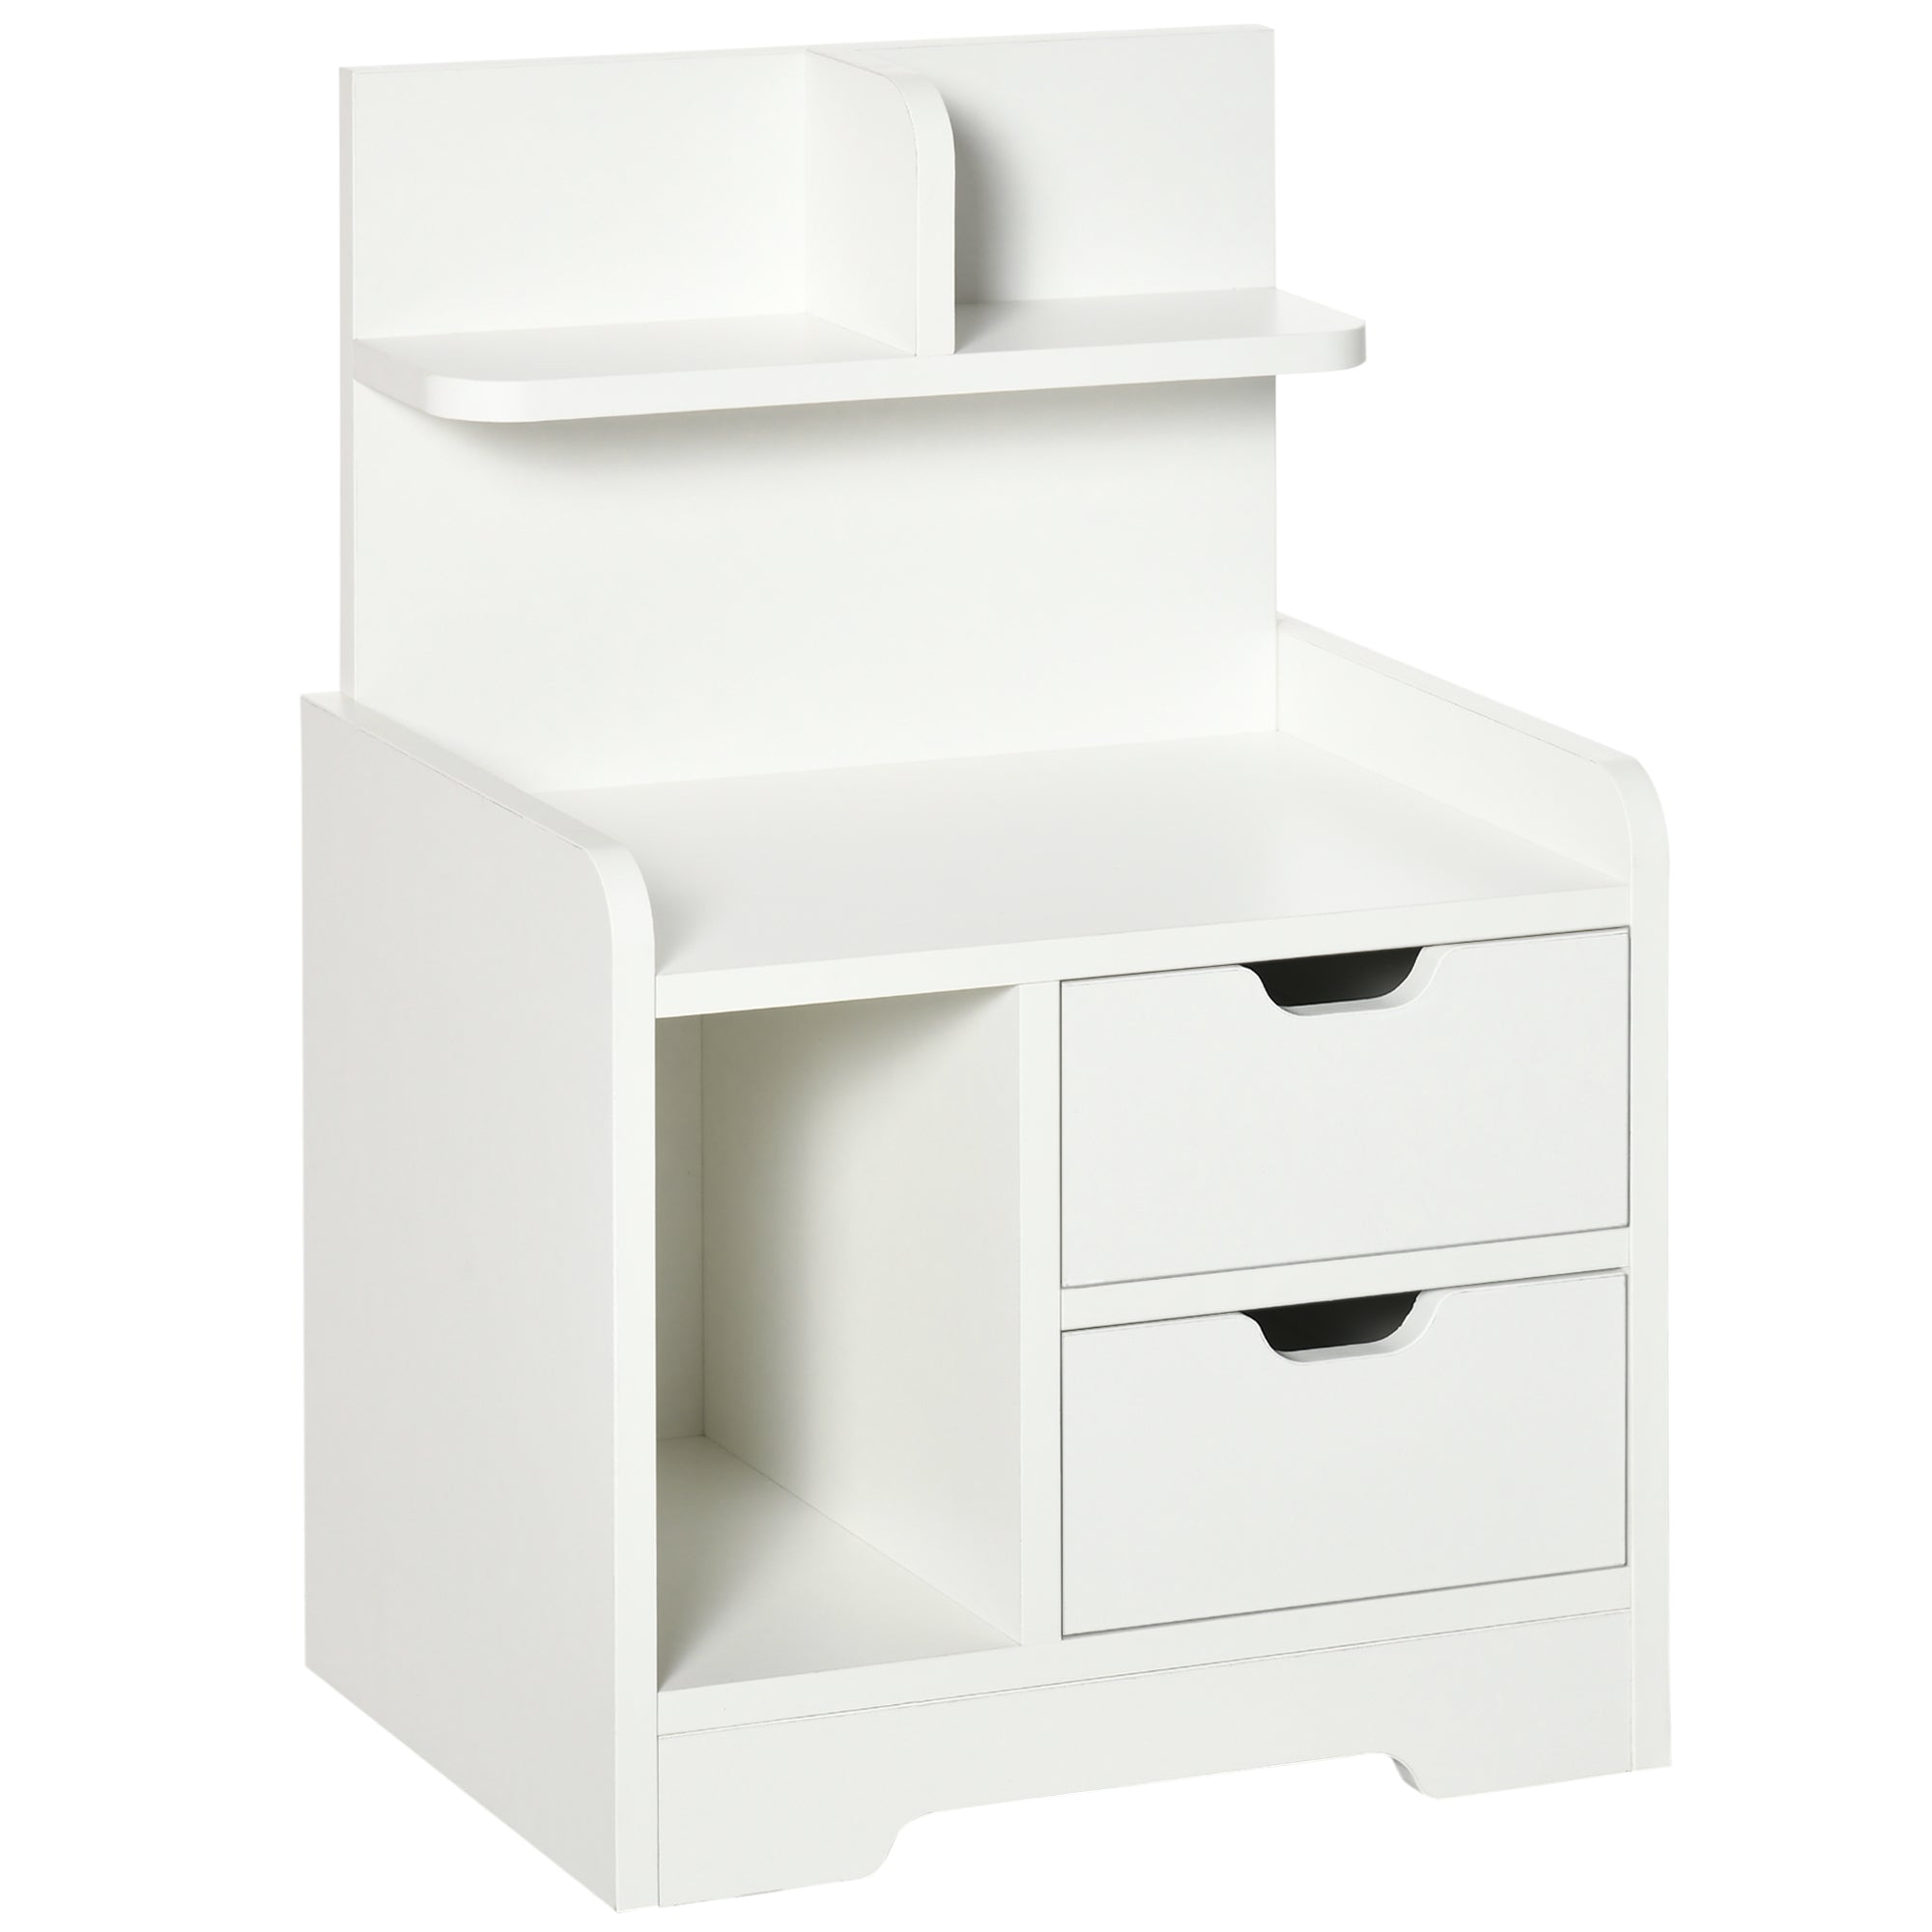 Bedside Table with 2 Drawers and Storage Shelves for Living Room Bedroom Accent Table Small Cabinet, White-0